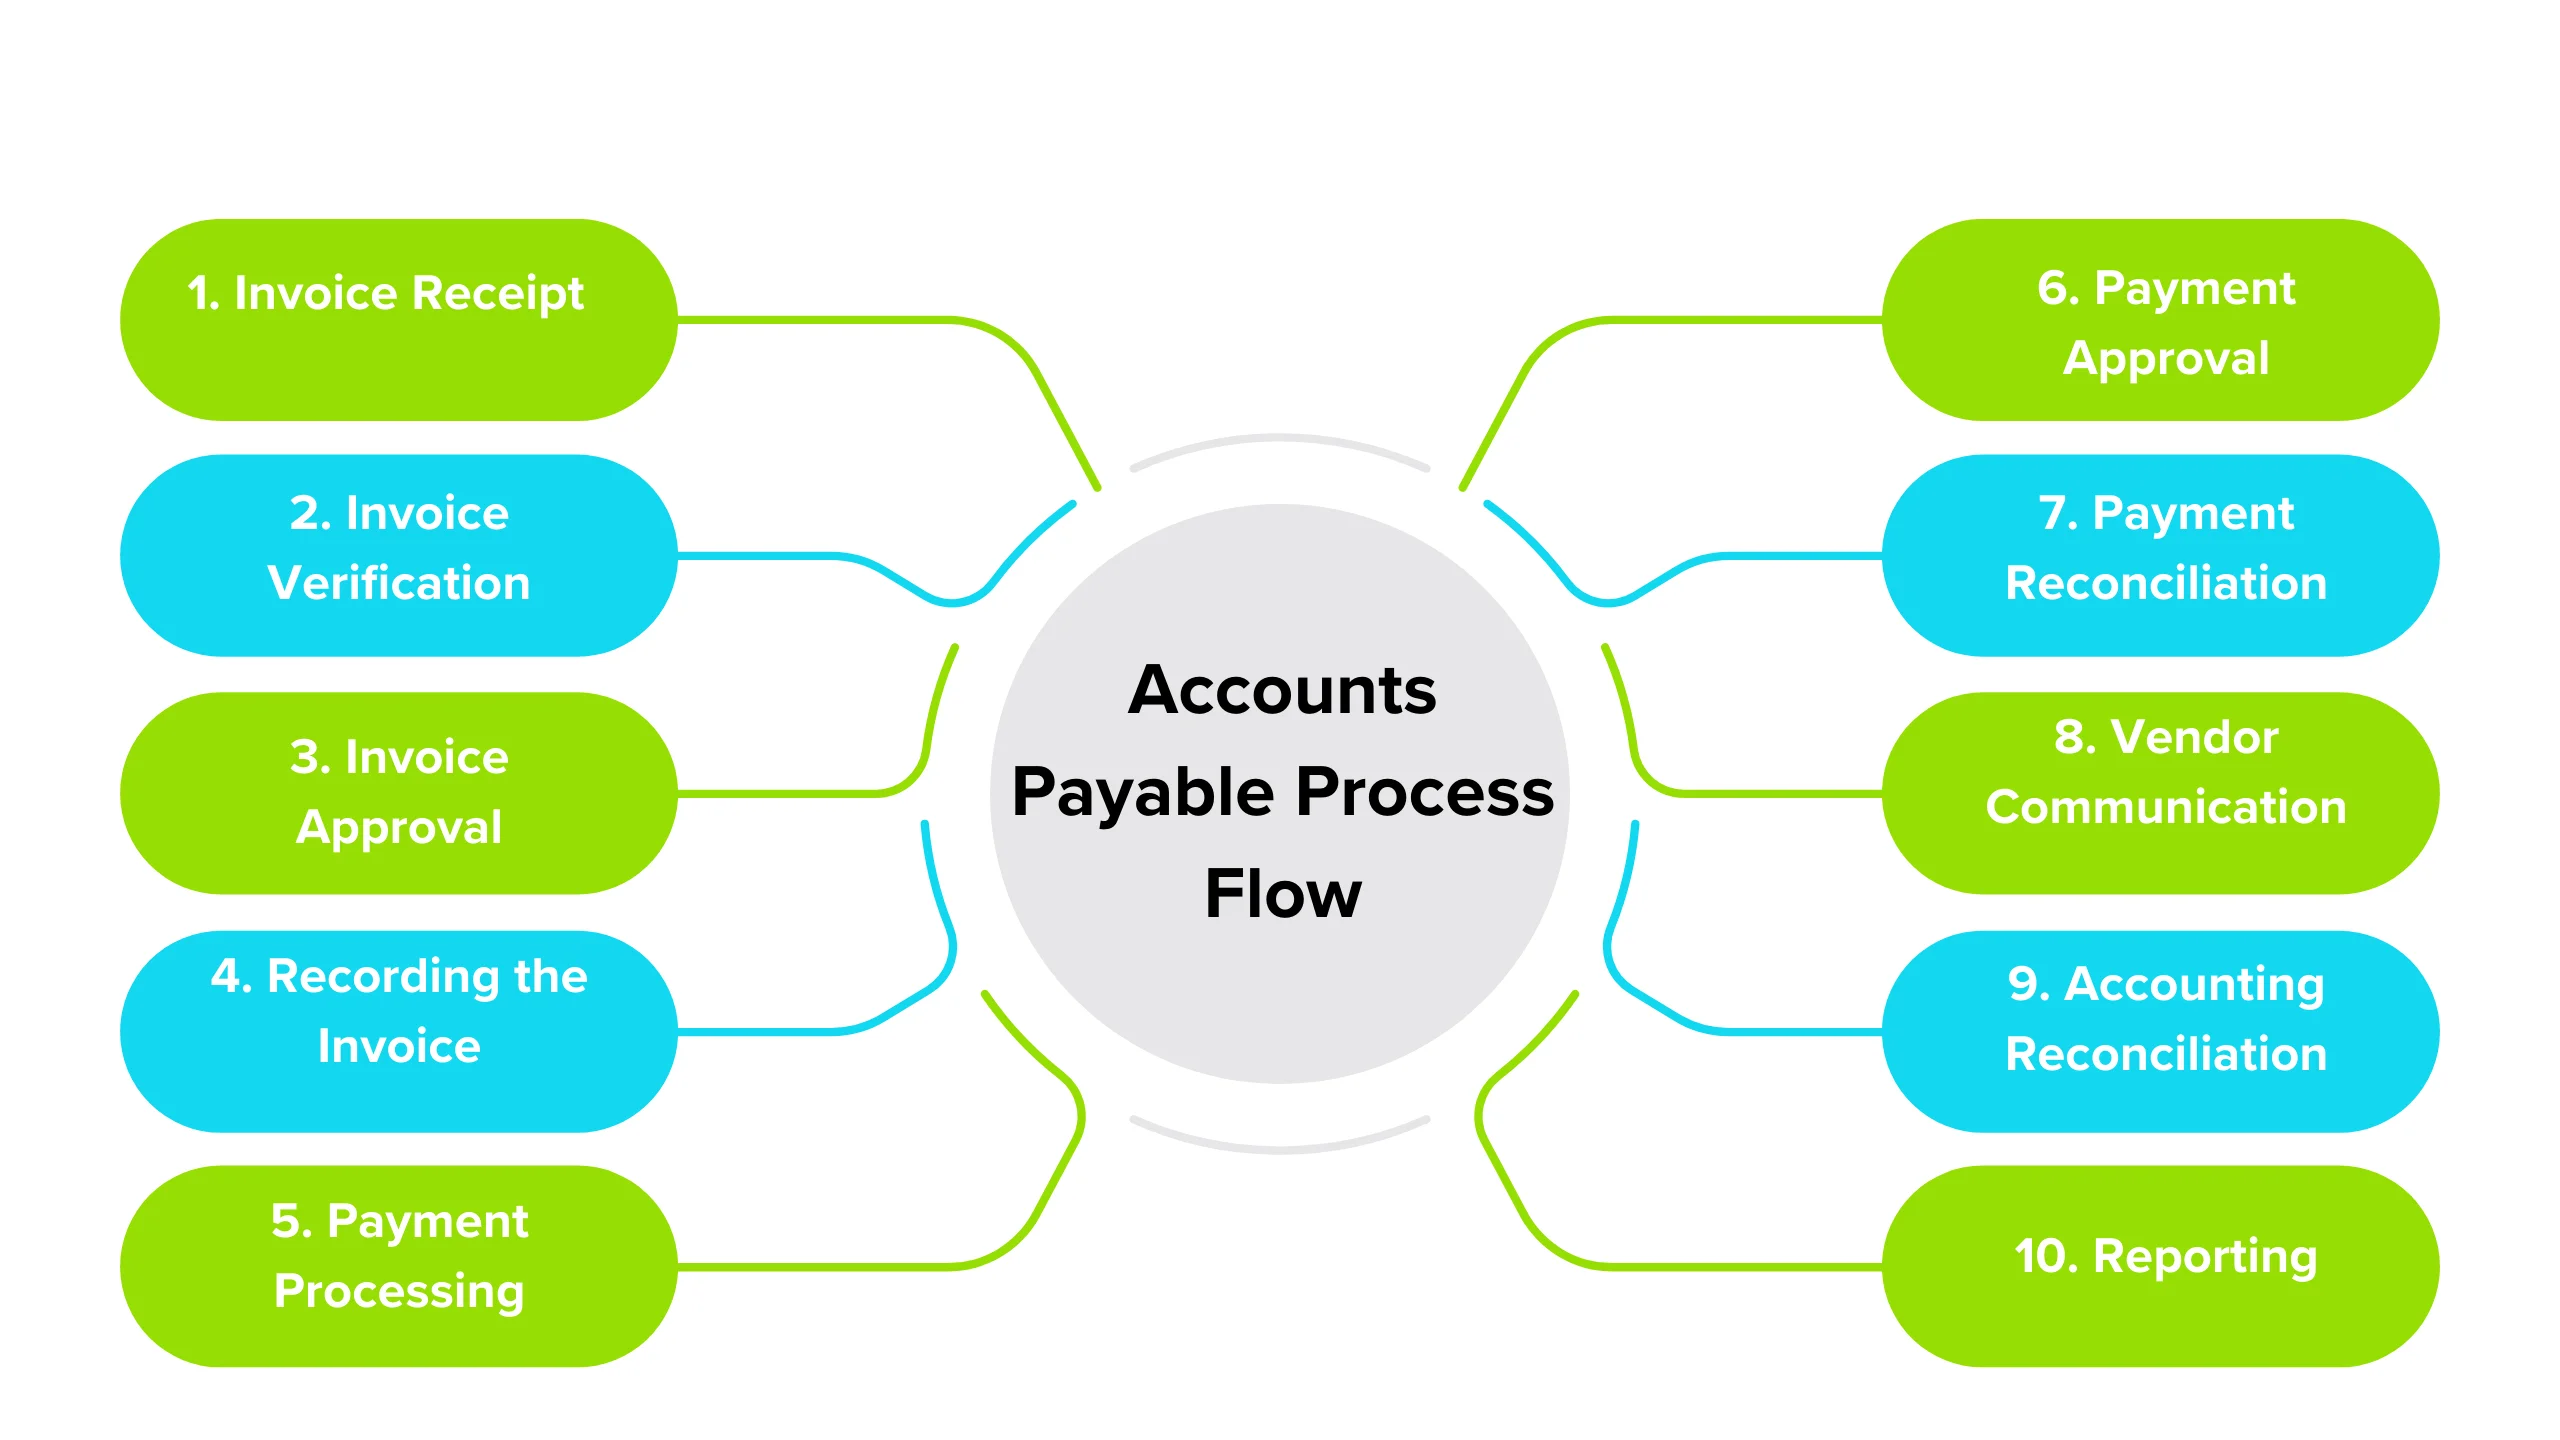 The accounts payable process flow involves several steps to ensure that a company pays its bills and invoices accurately and on time. 